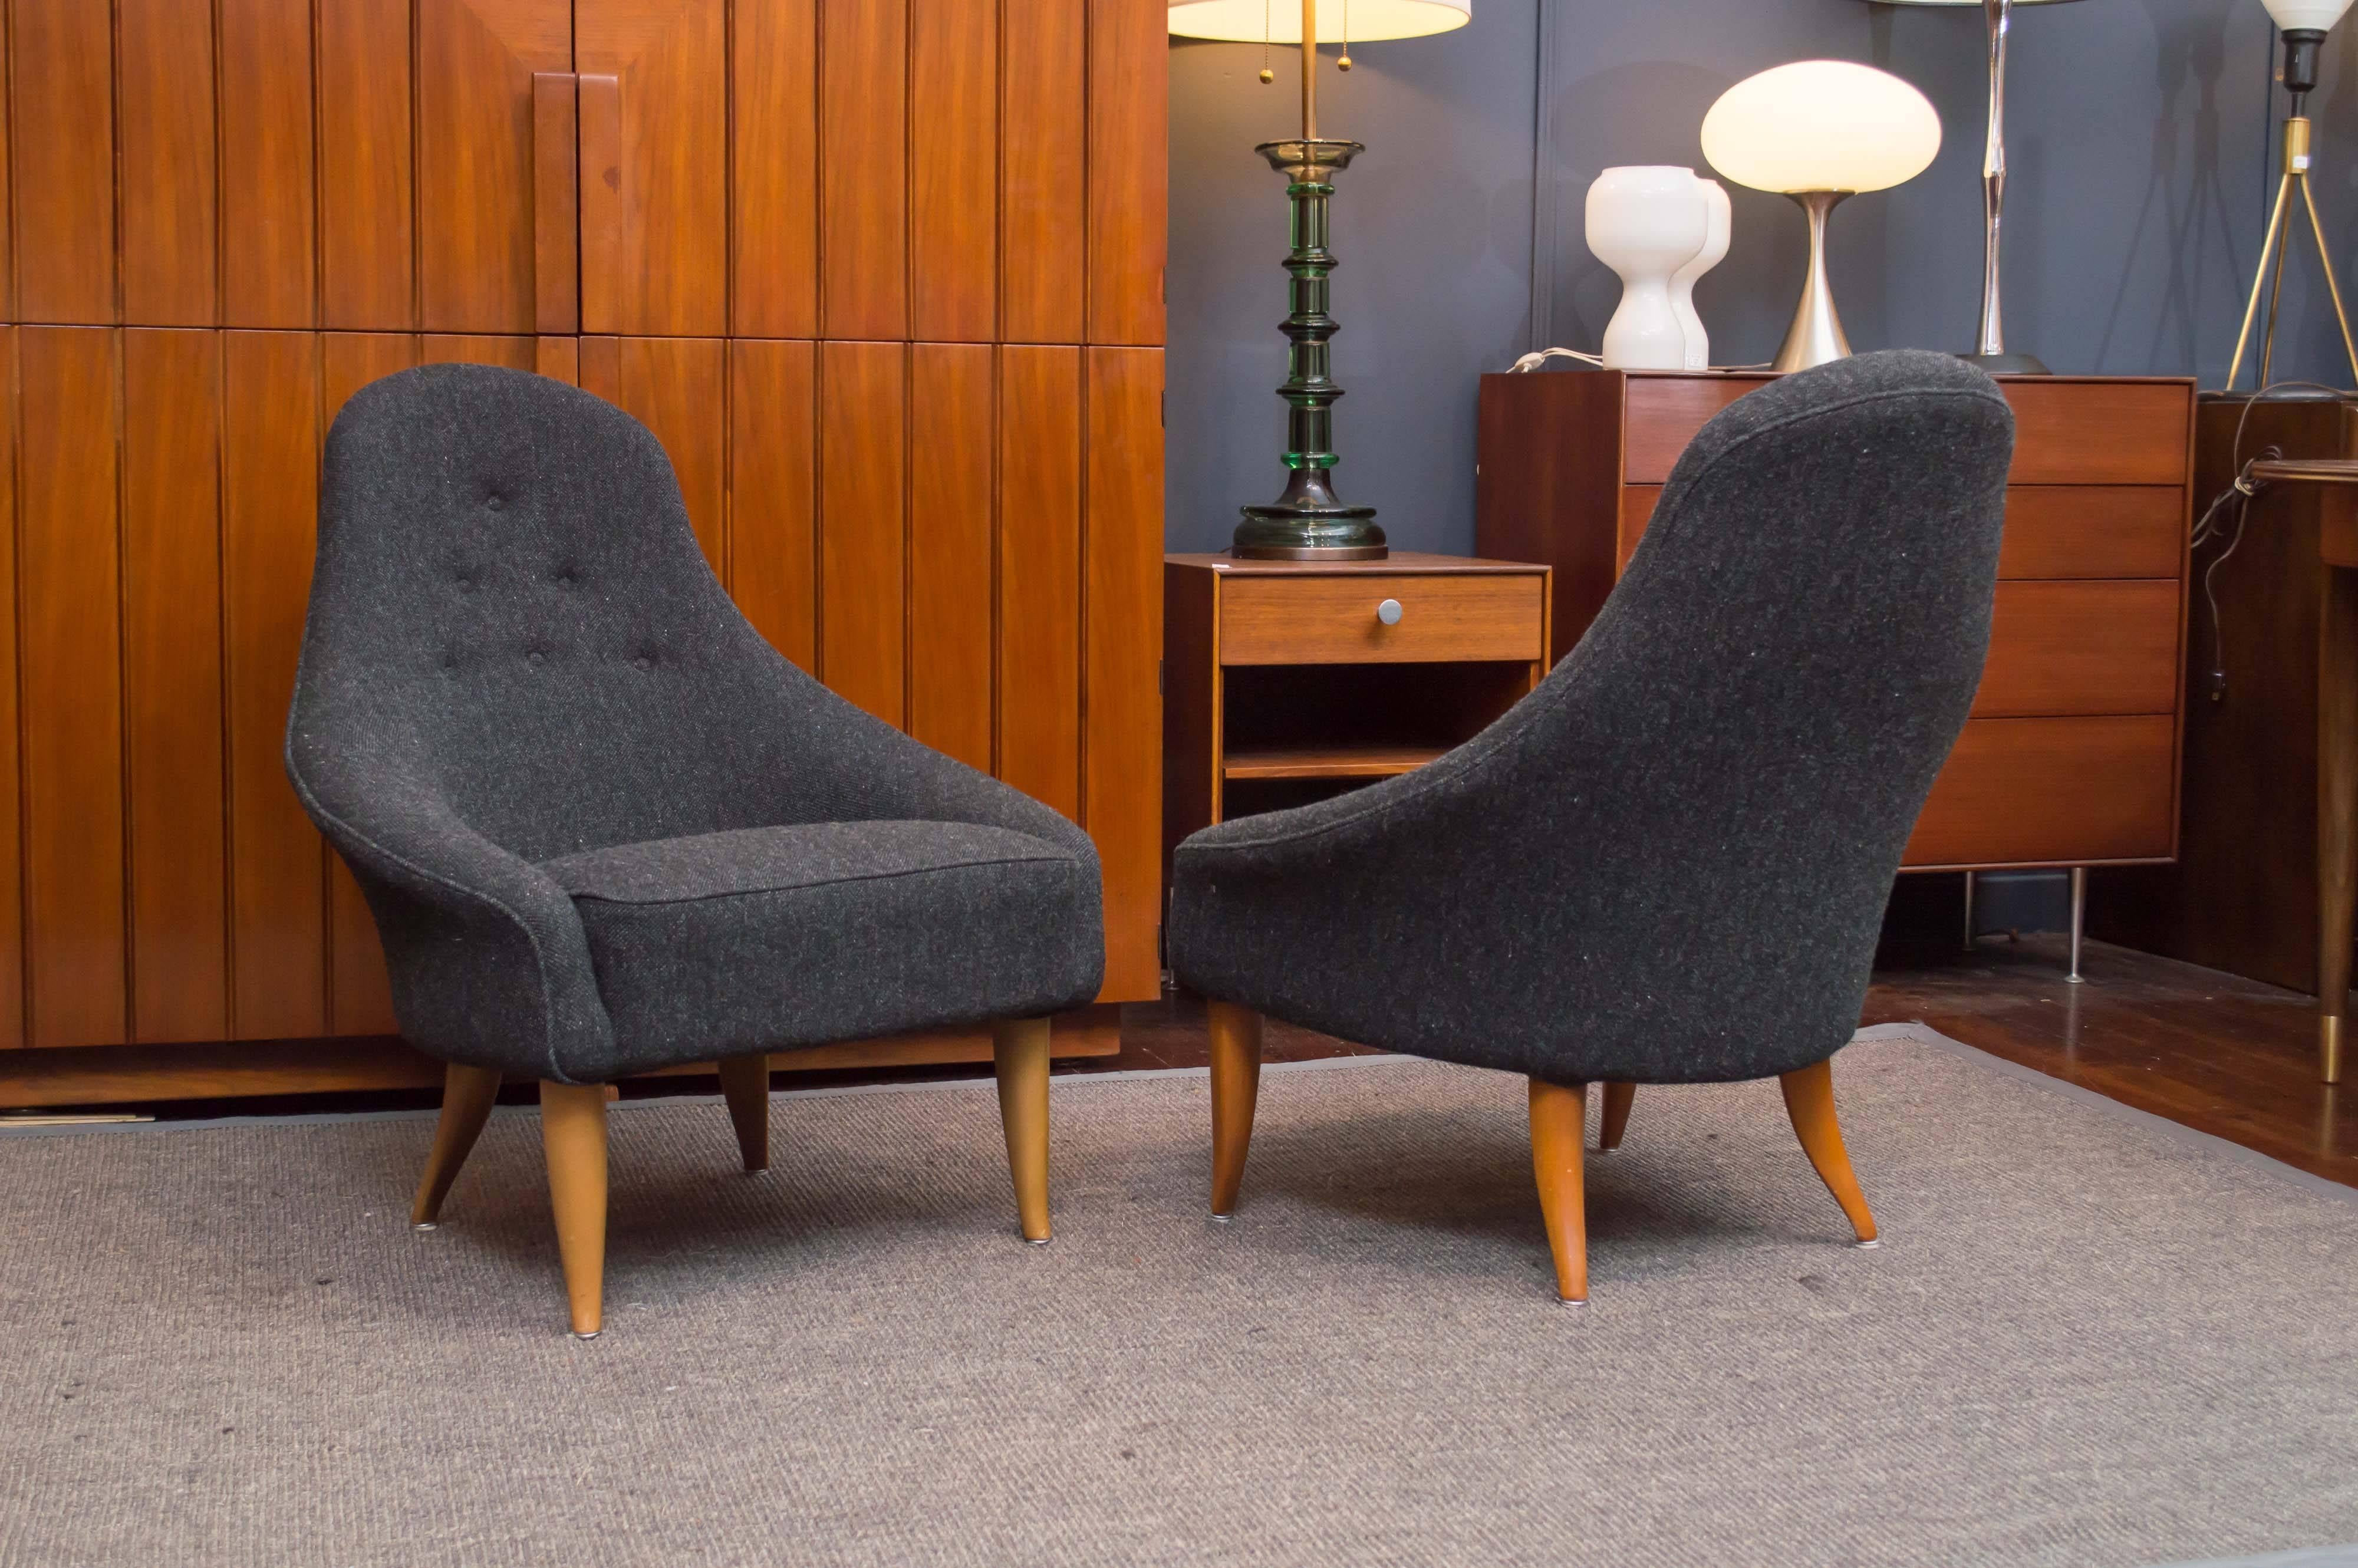 Mid-20th Century Pair of Little Eva Chairs by Kerstin Hörlin-Holmquist